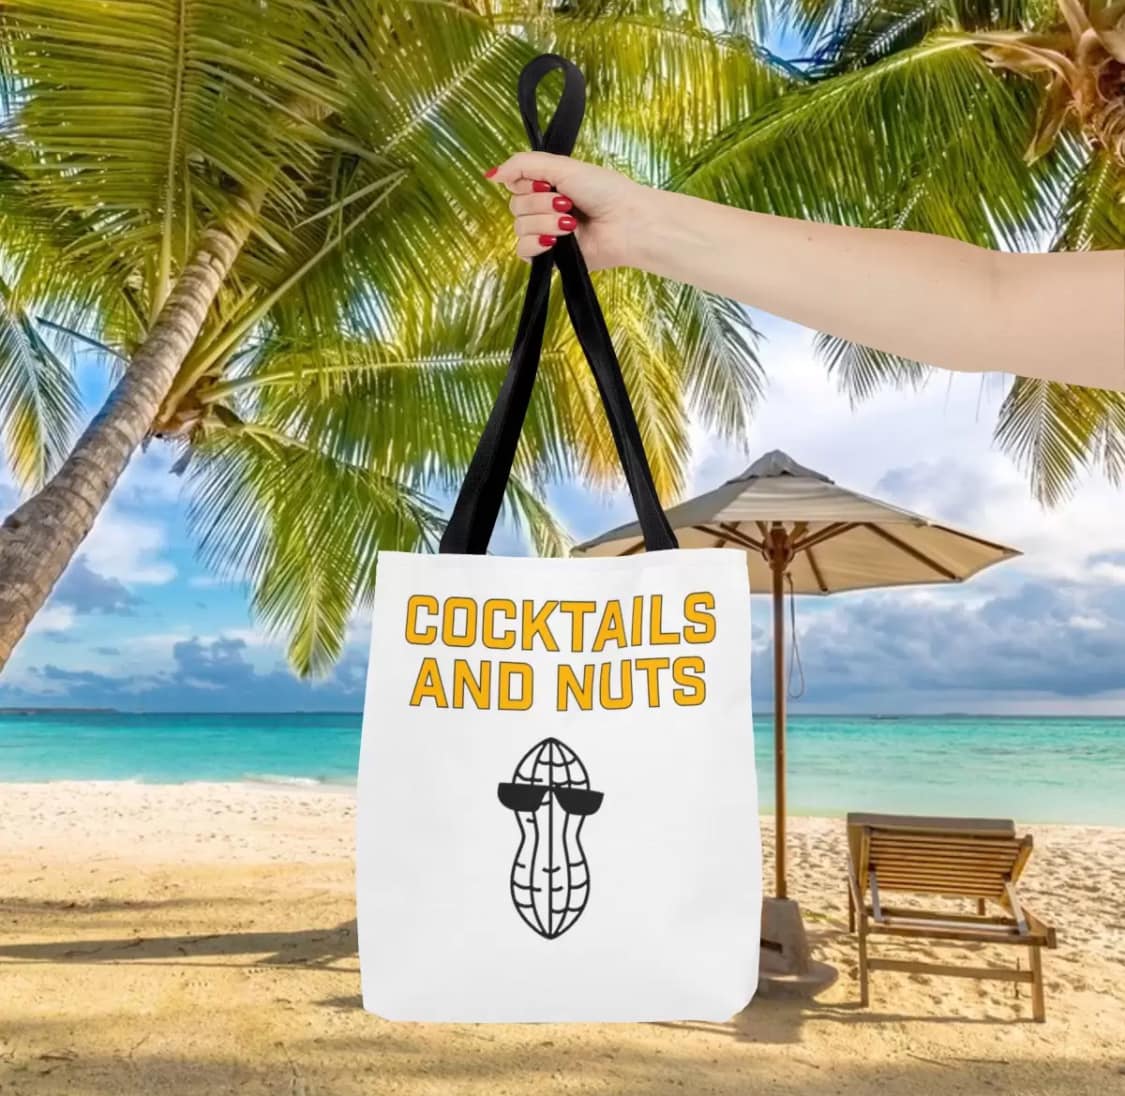 Just what you need for a quick getaway to the beach or anywhere in between. 🥜☀️🕶️ Bag yours: hancockpeanuts.com/product/cockta… #cocktails #nuts #hancockpeanuts #cocktailsandnuts #tote #bag #beach